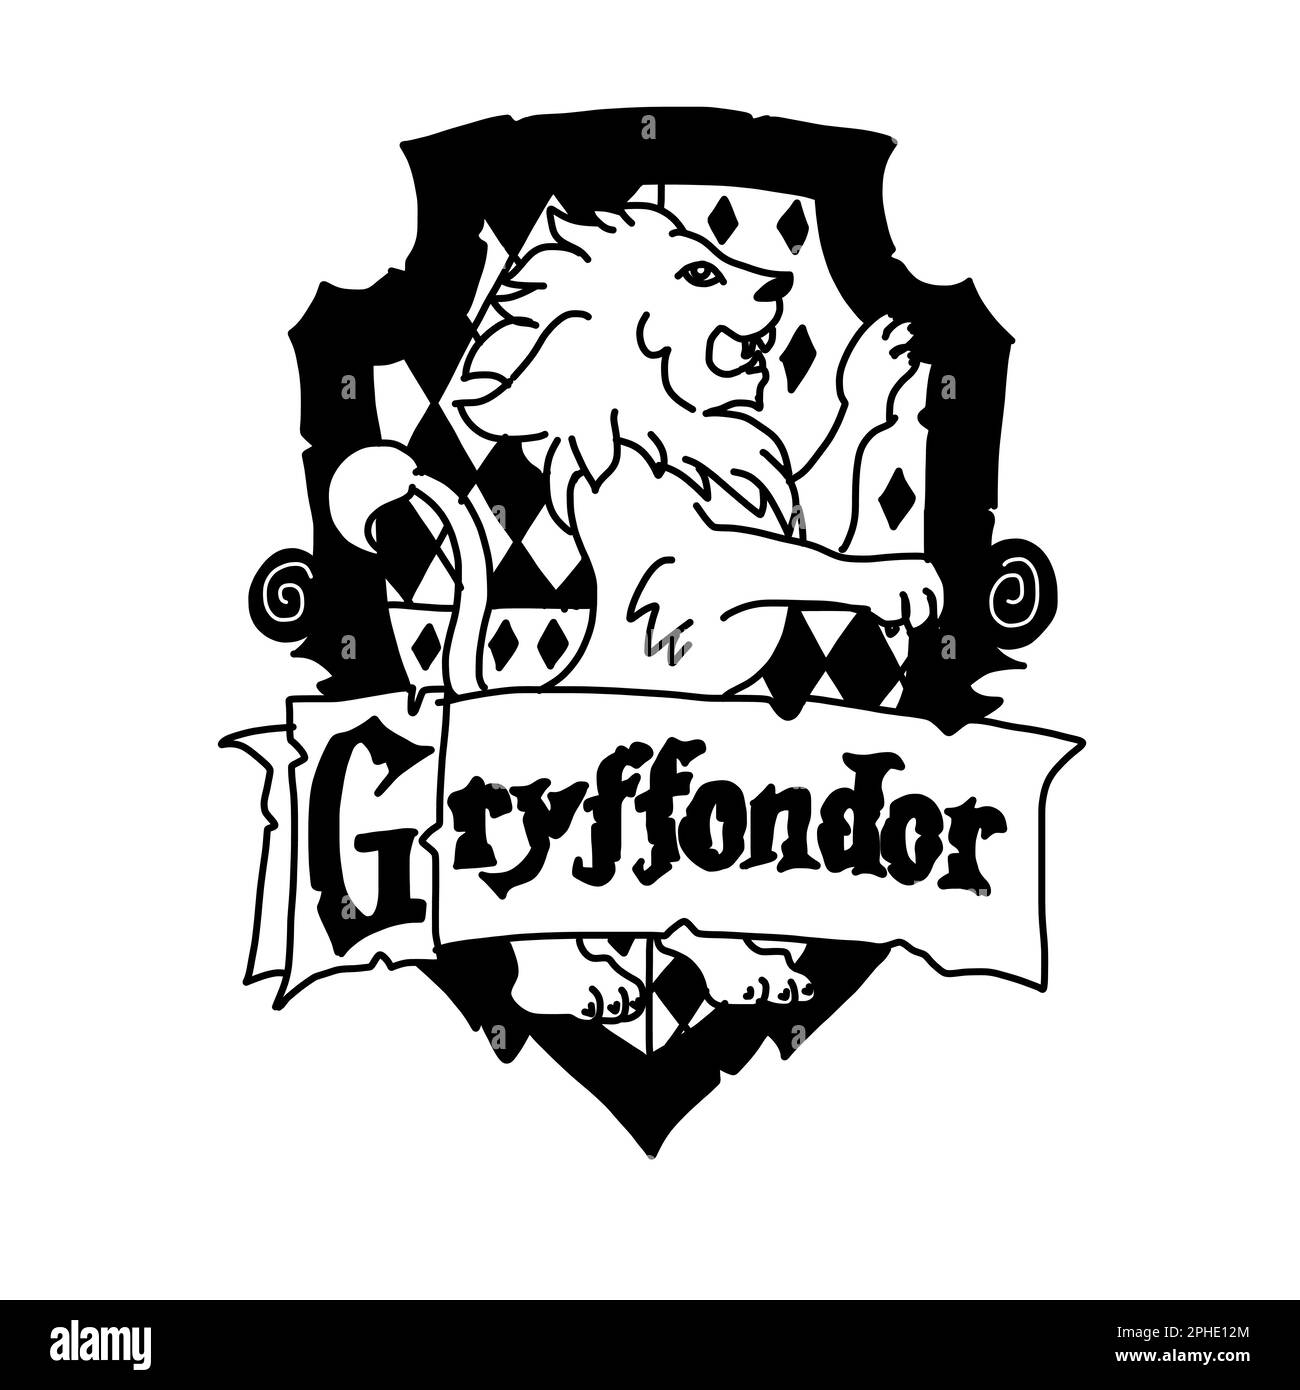 Harry Potter Gryffindor logo in cartoon doodle style. Vector illustration isolated on white background. Stock Vector